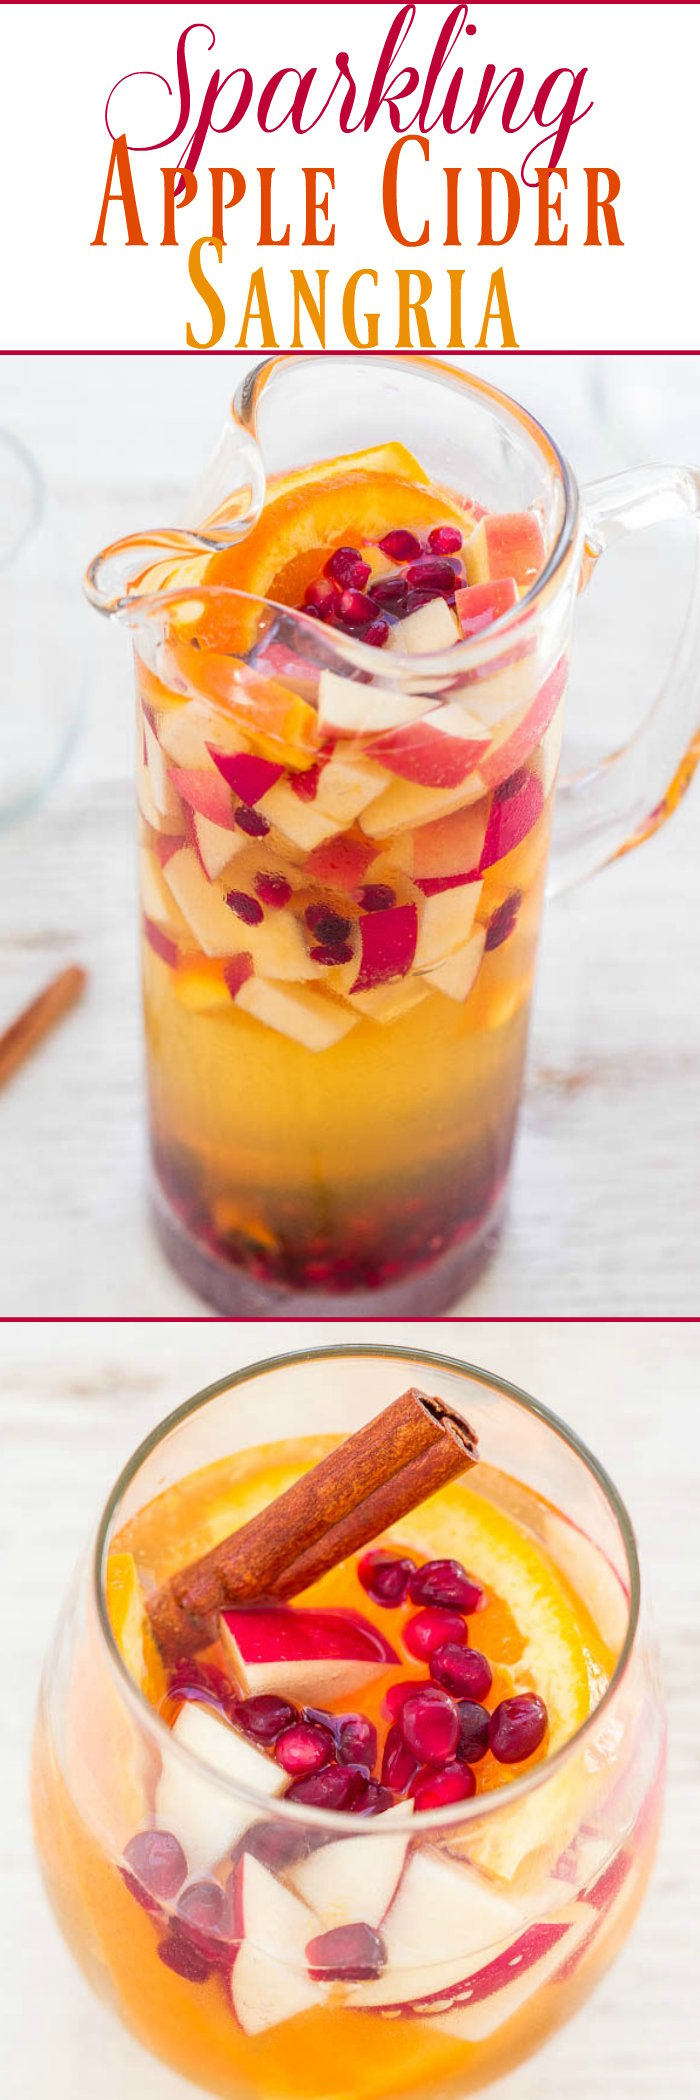 Sparkling Apple Cider Sangria - Apples, oranges, pomegranate seeds, and cinnamon sticks with sparkling cider are a FUN twist on classic sangria!! So easy! Make it for your next party and everyone will want a refill!!